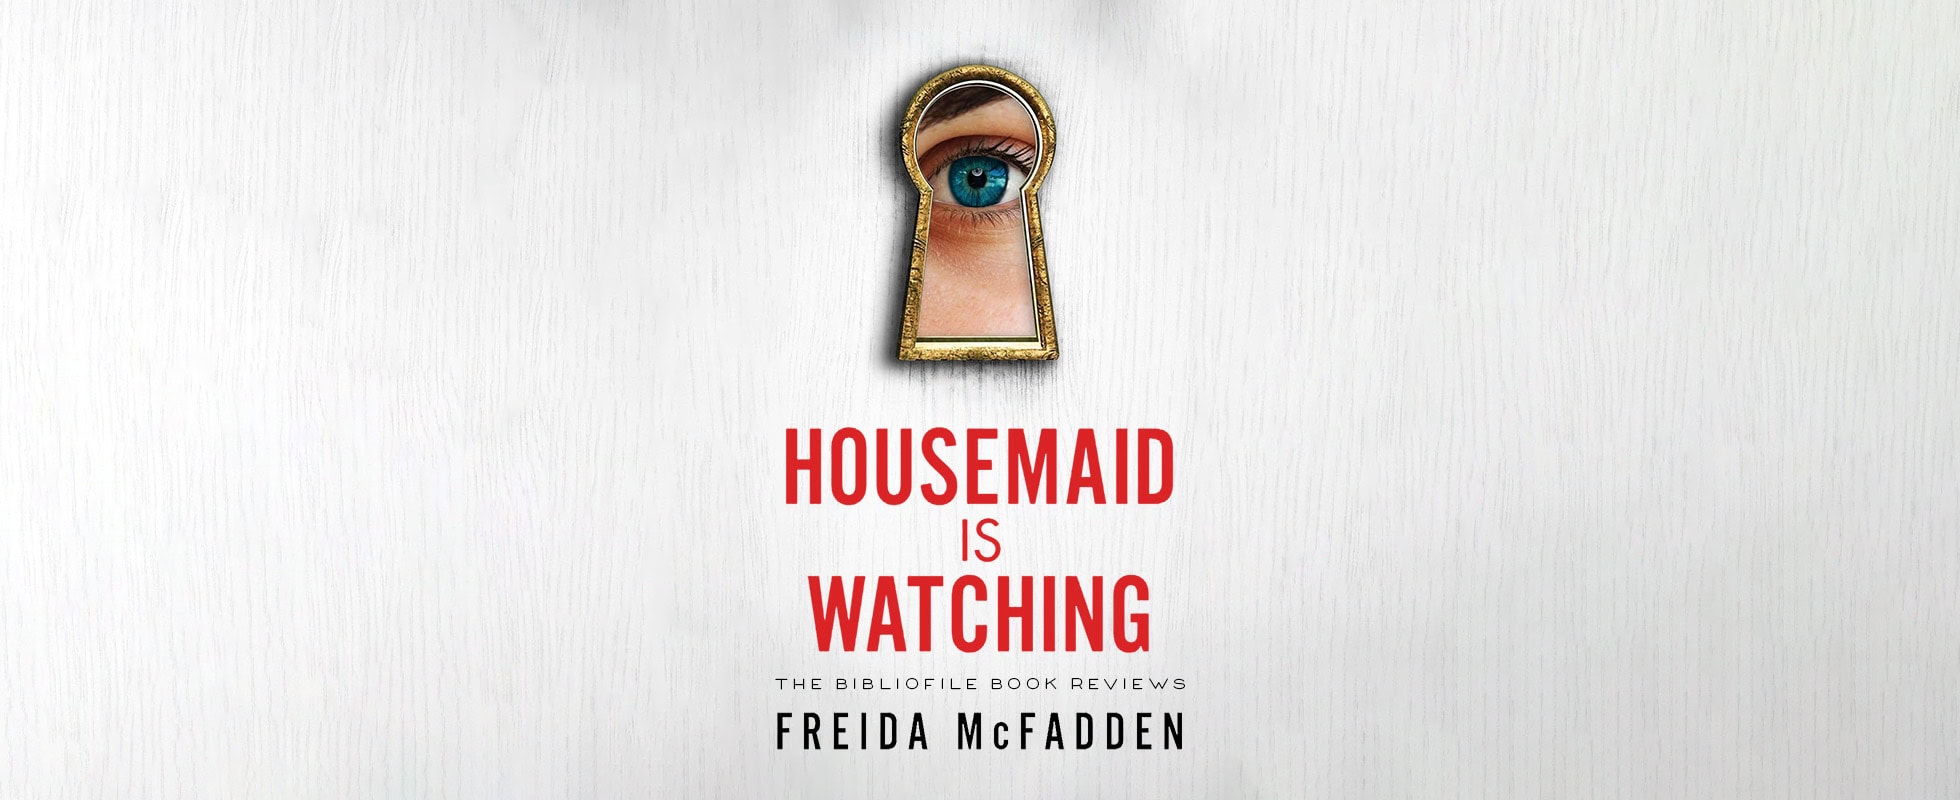 the housemaid is watching freida mcfadden book review plot summary synopsis recap discussion spoilers